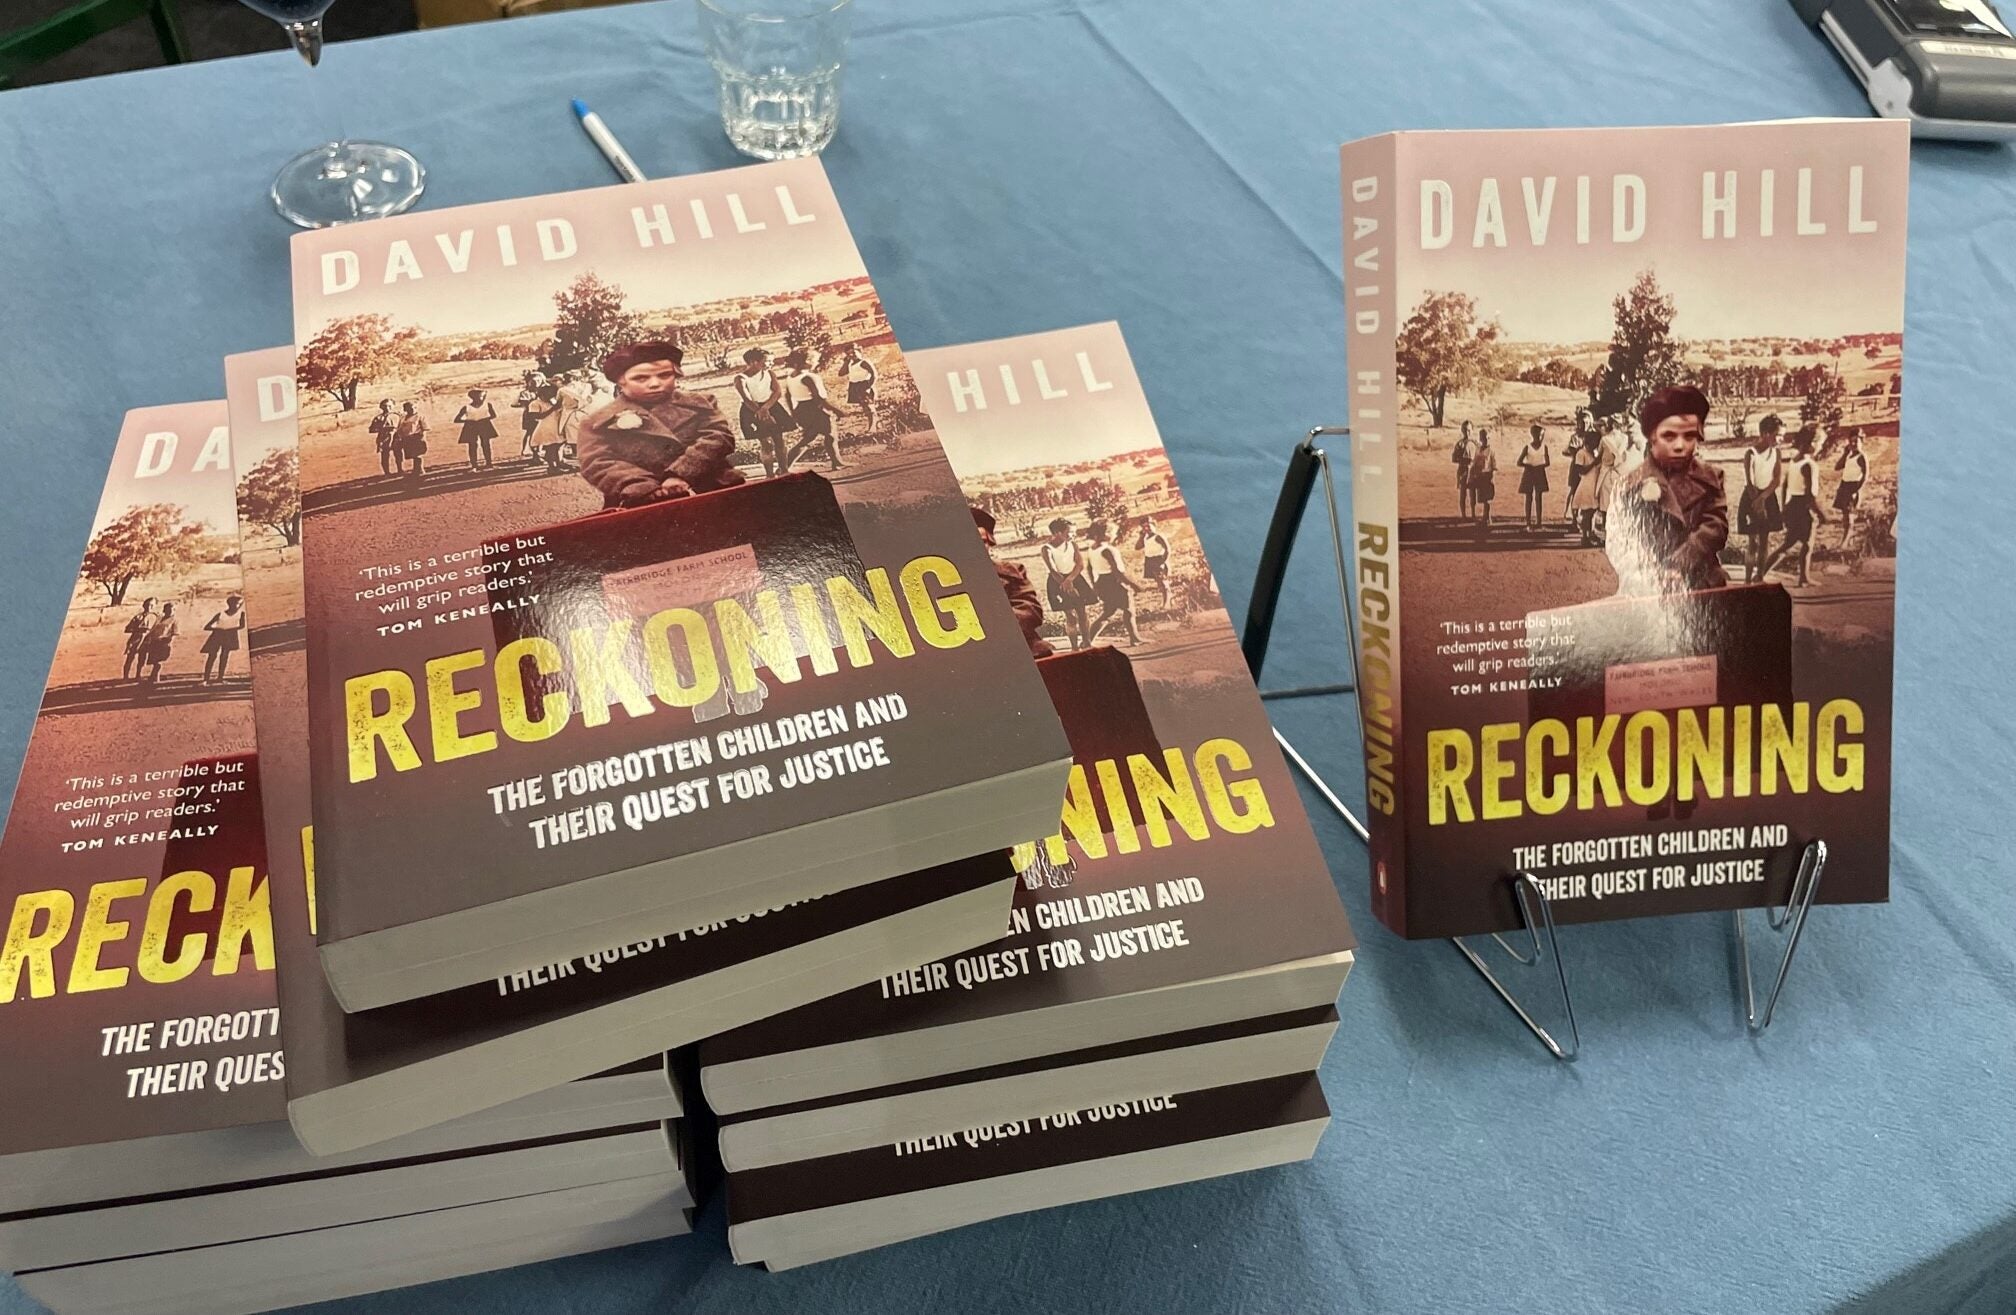 The Reckoning by David Hill